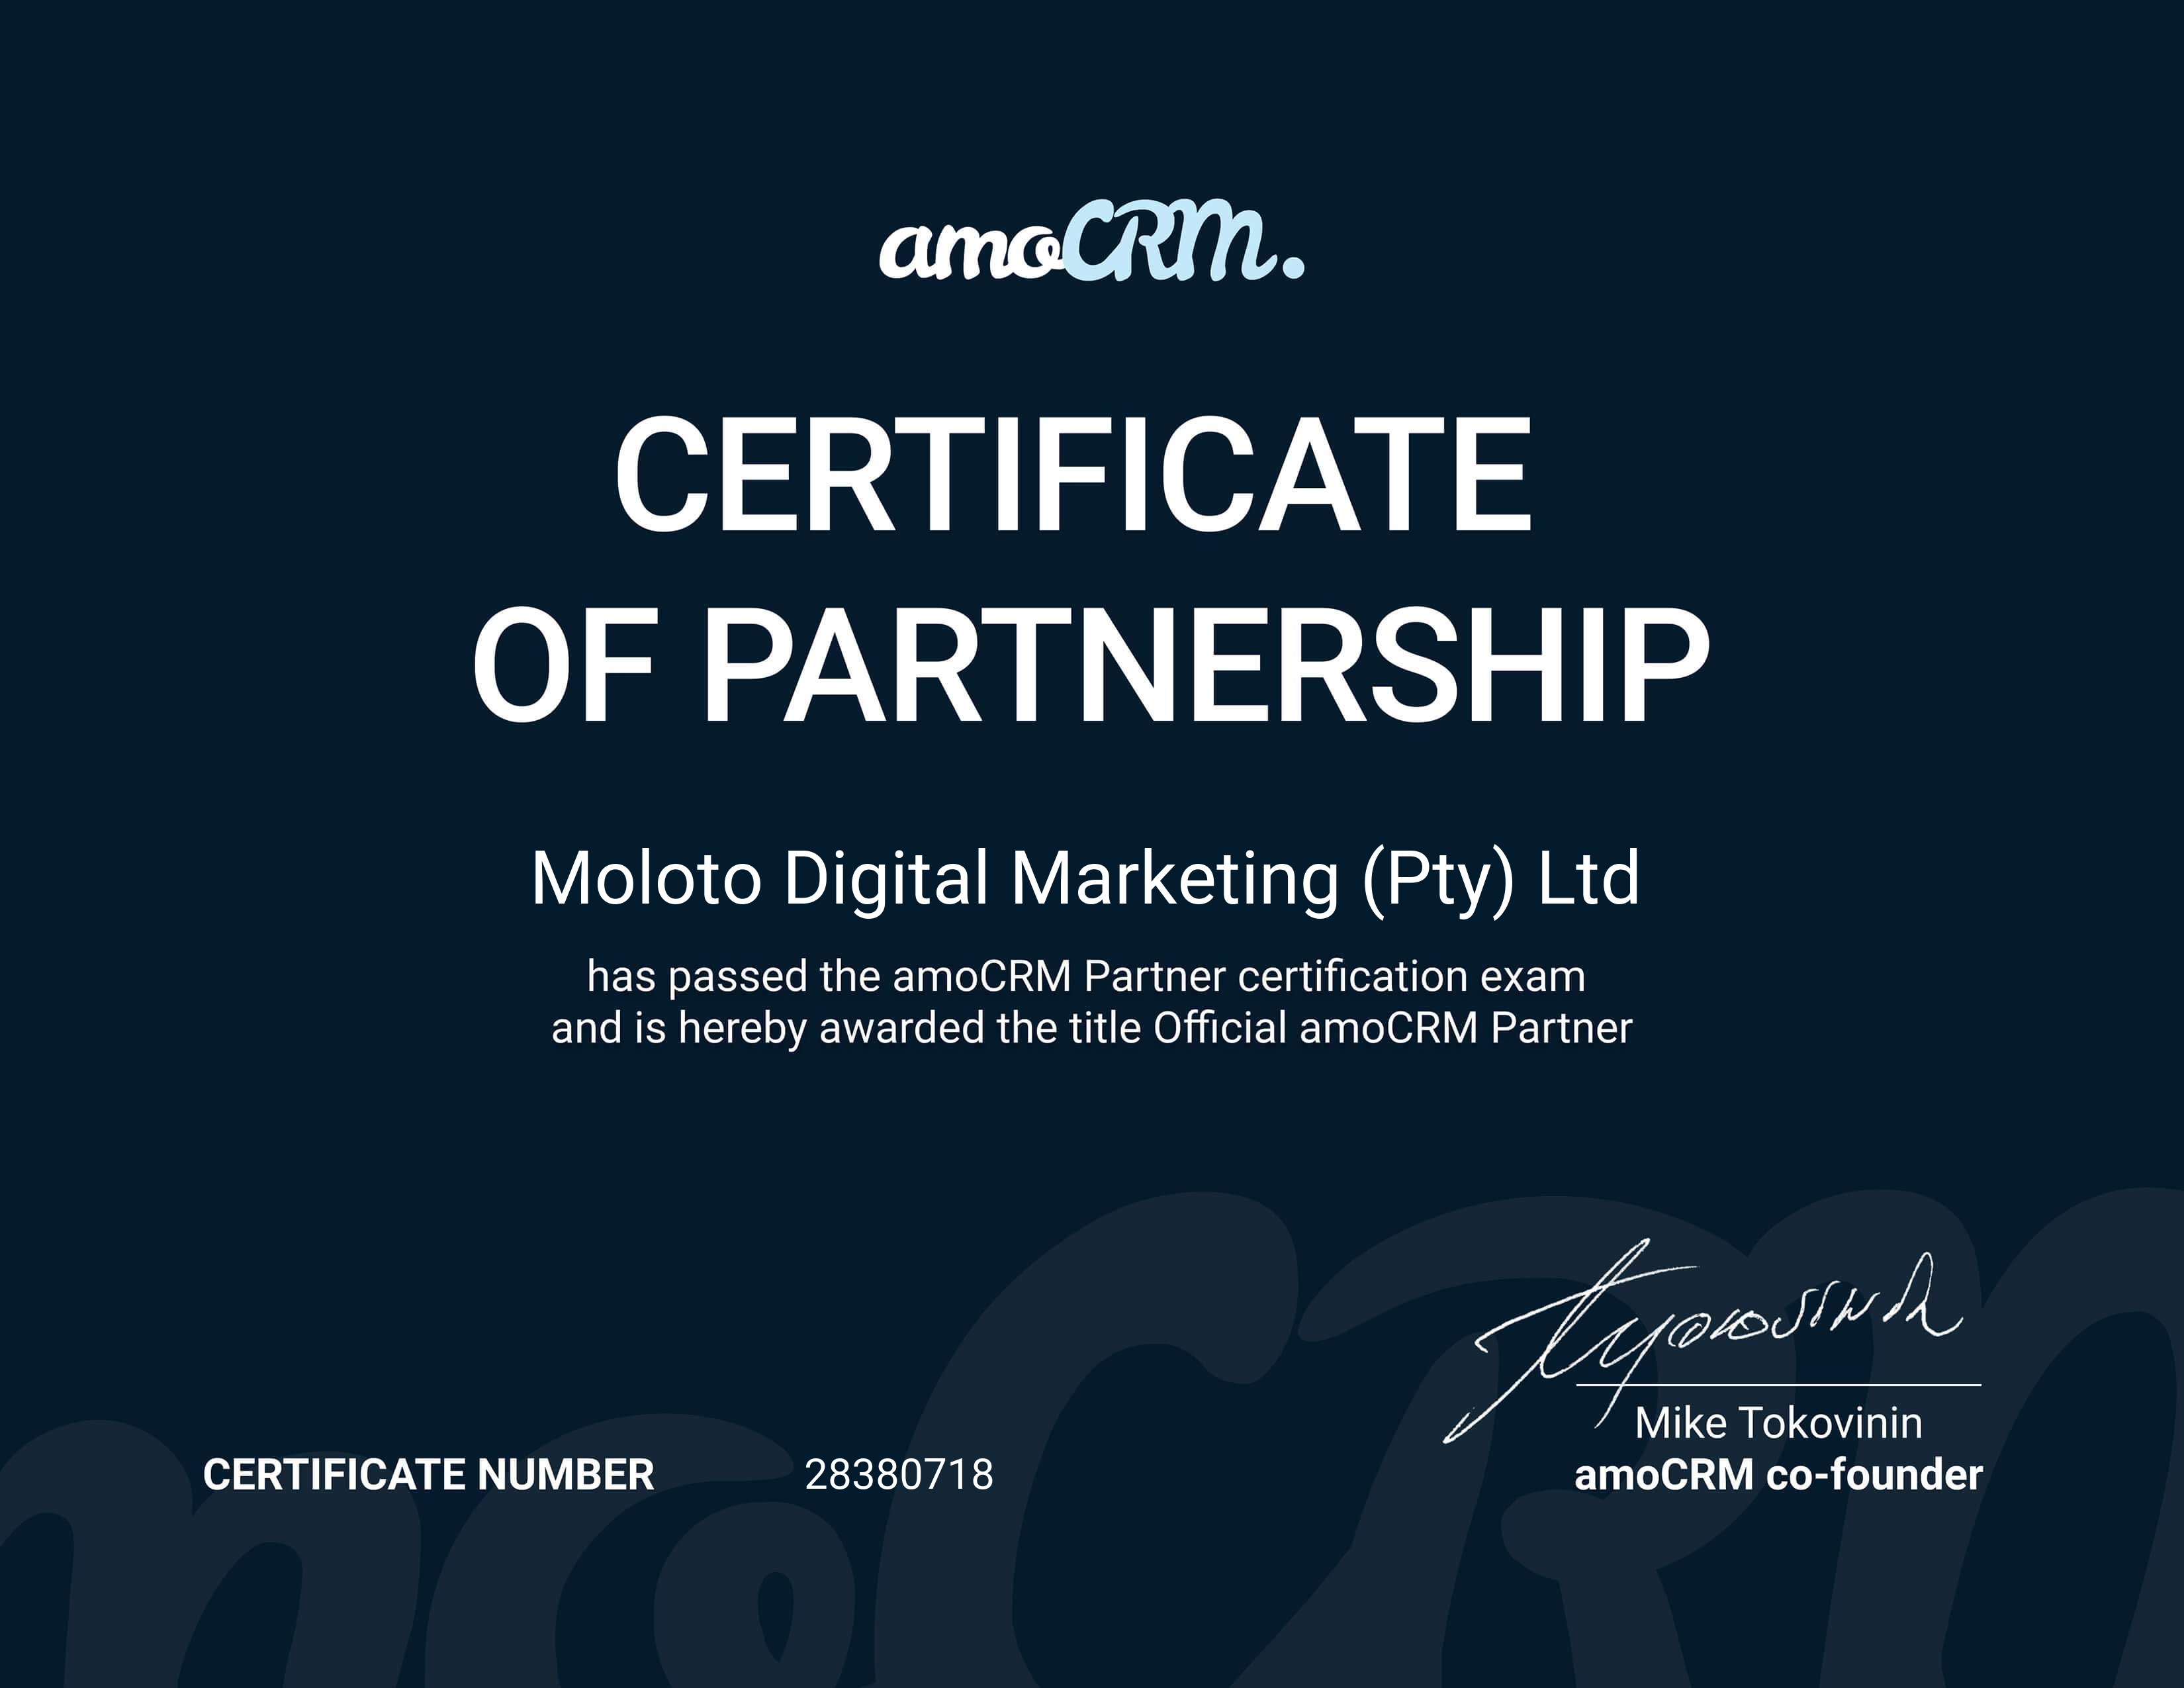 Official partnership certificate with amoCRM